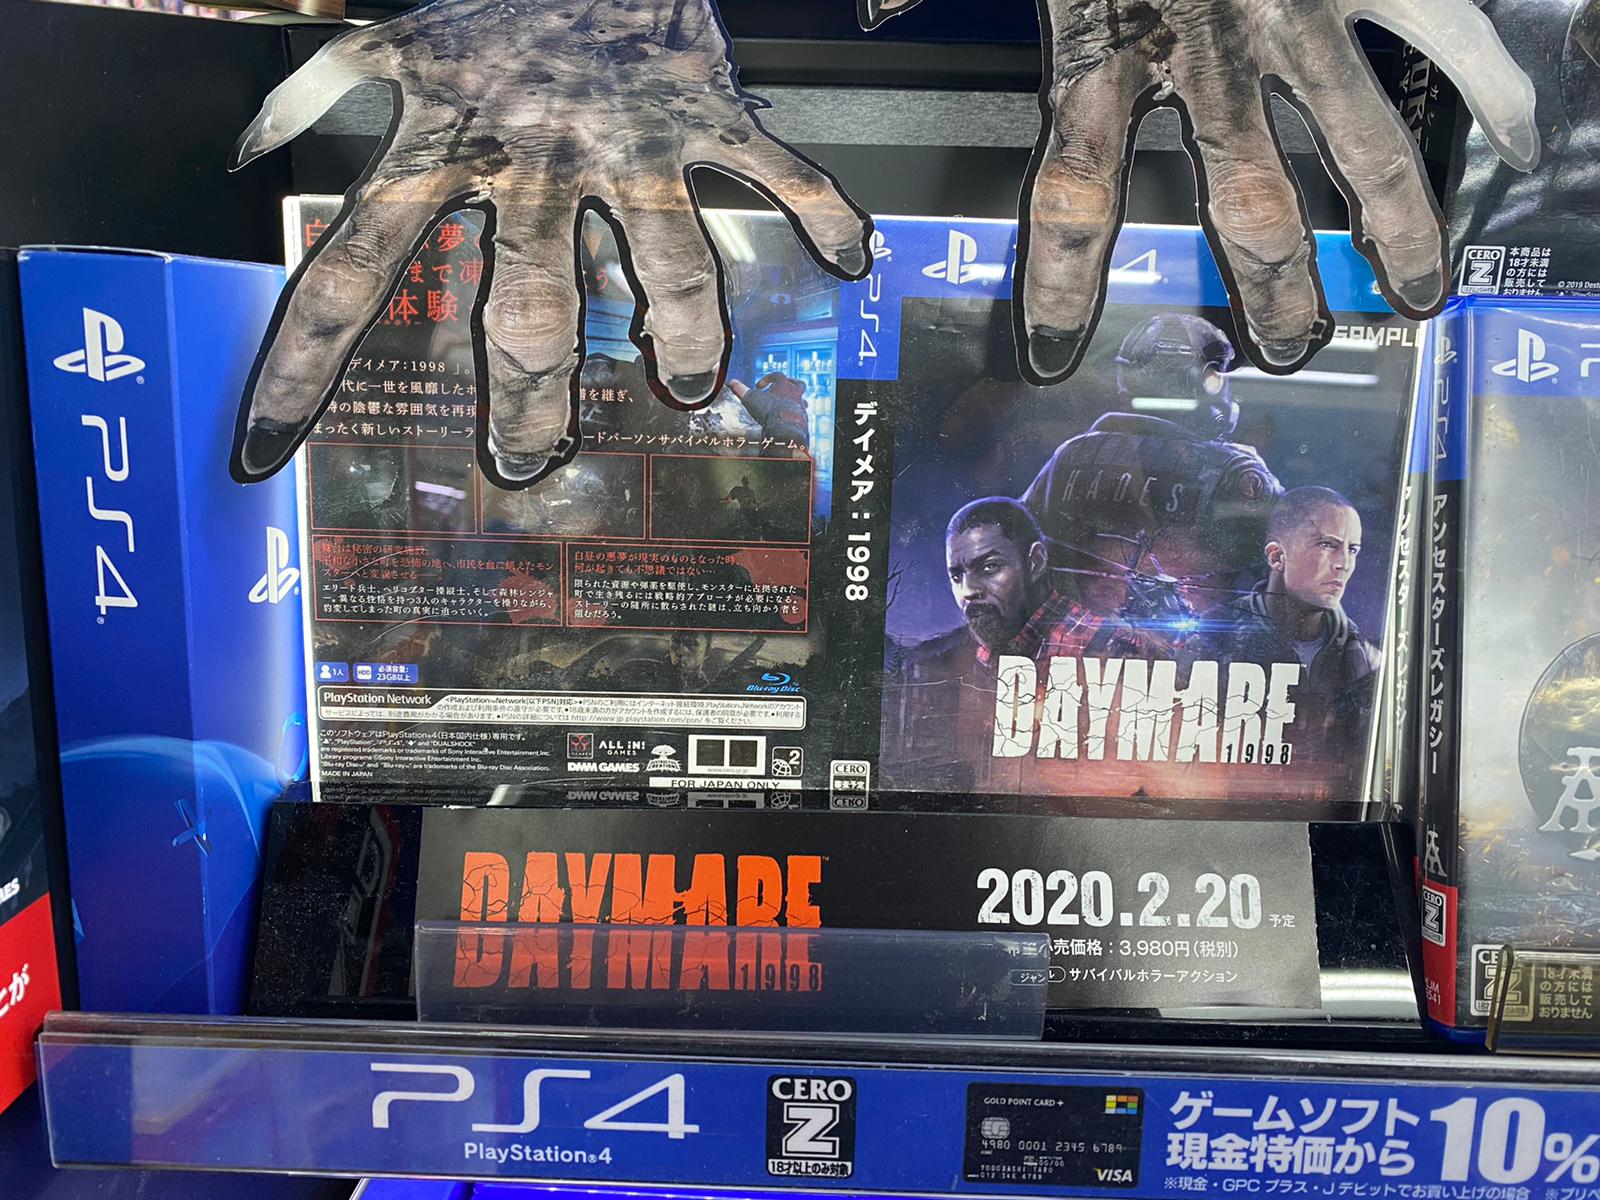 daymare 1998 ps4 store